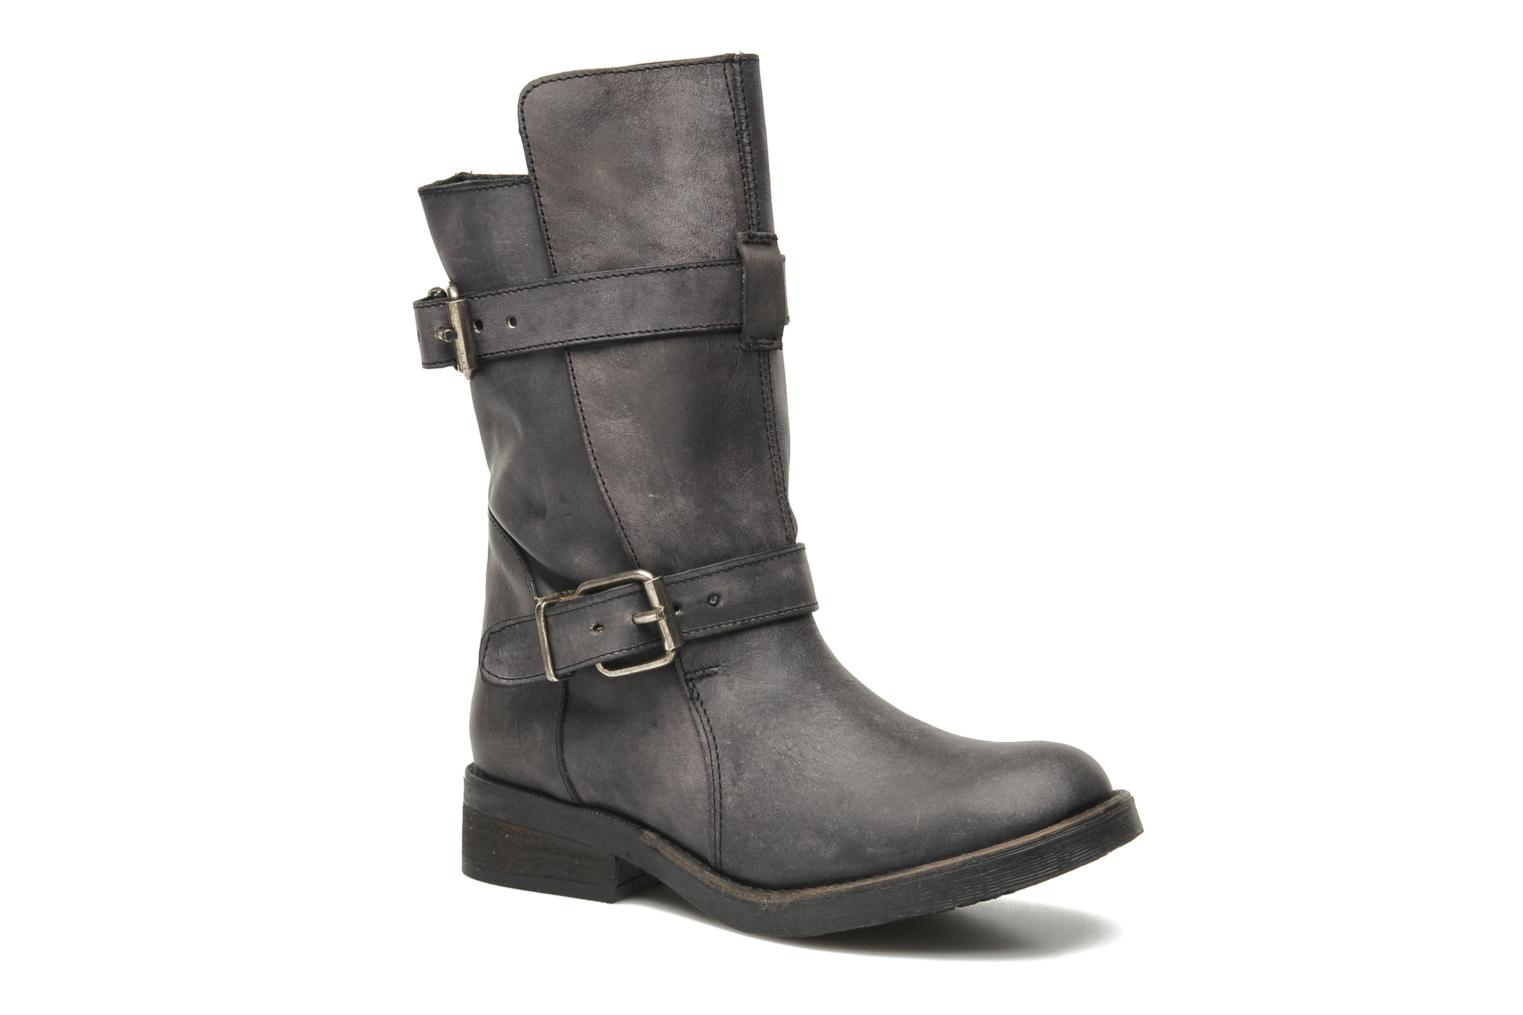 Steve Madden CAVEAT Ankle boots in Grey at Sarenza (198837)